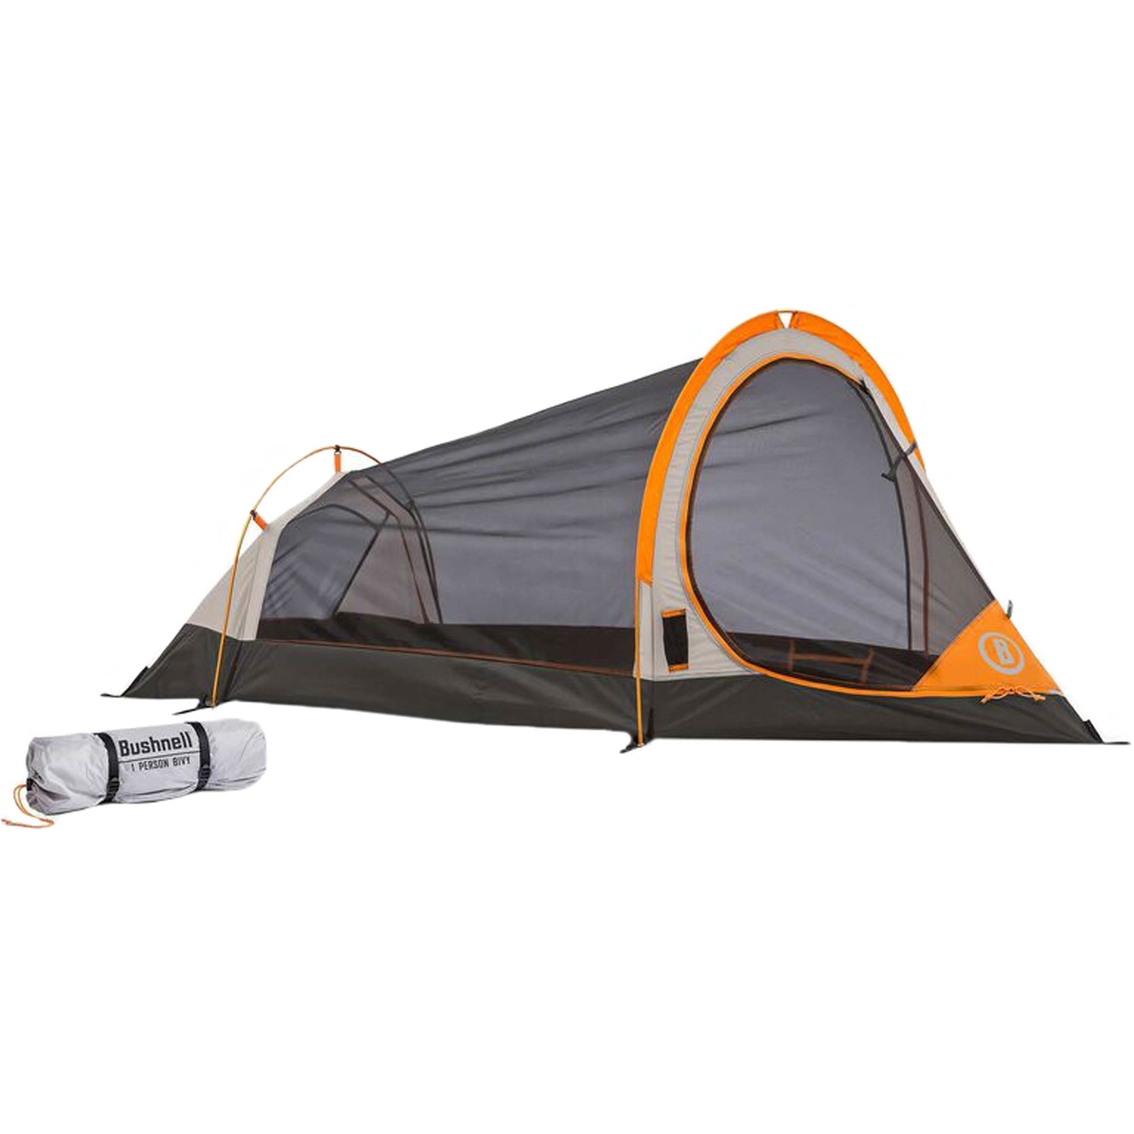 Bushnell 1 Person Backpacking Tent - Image 3 of 7